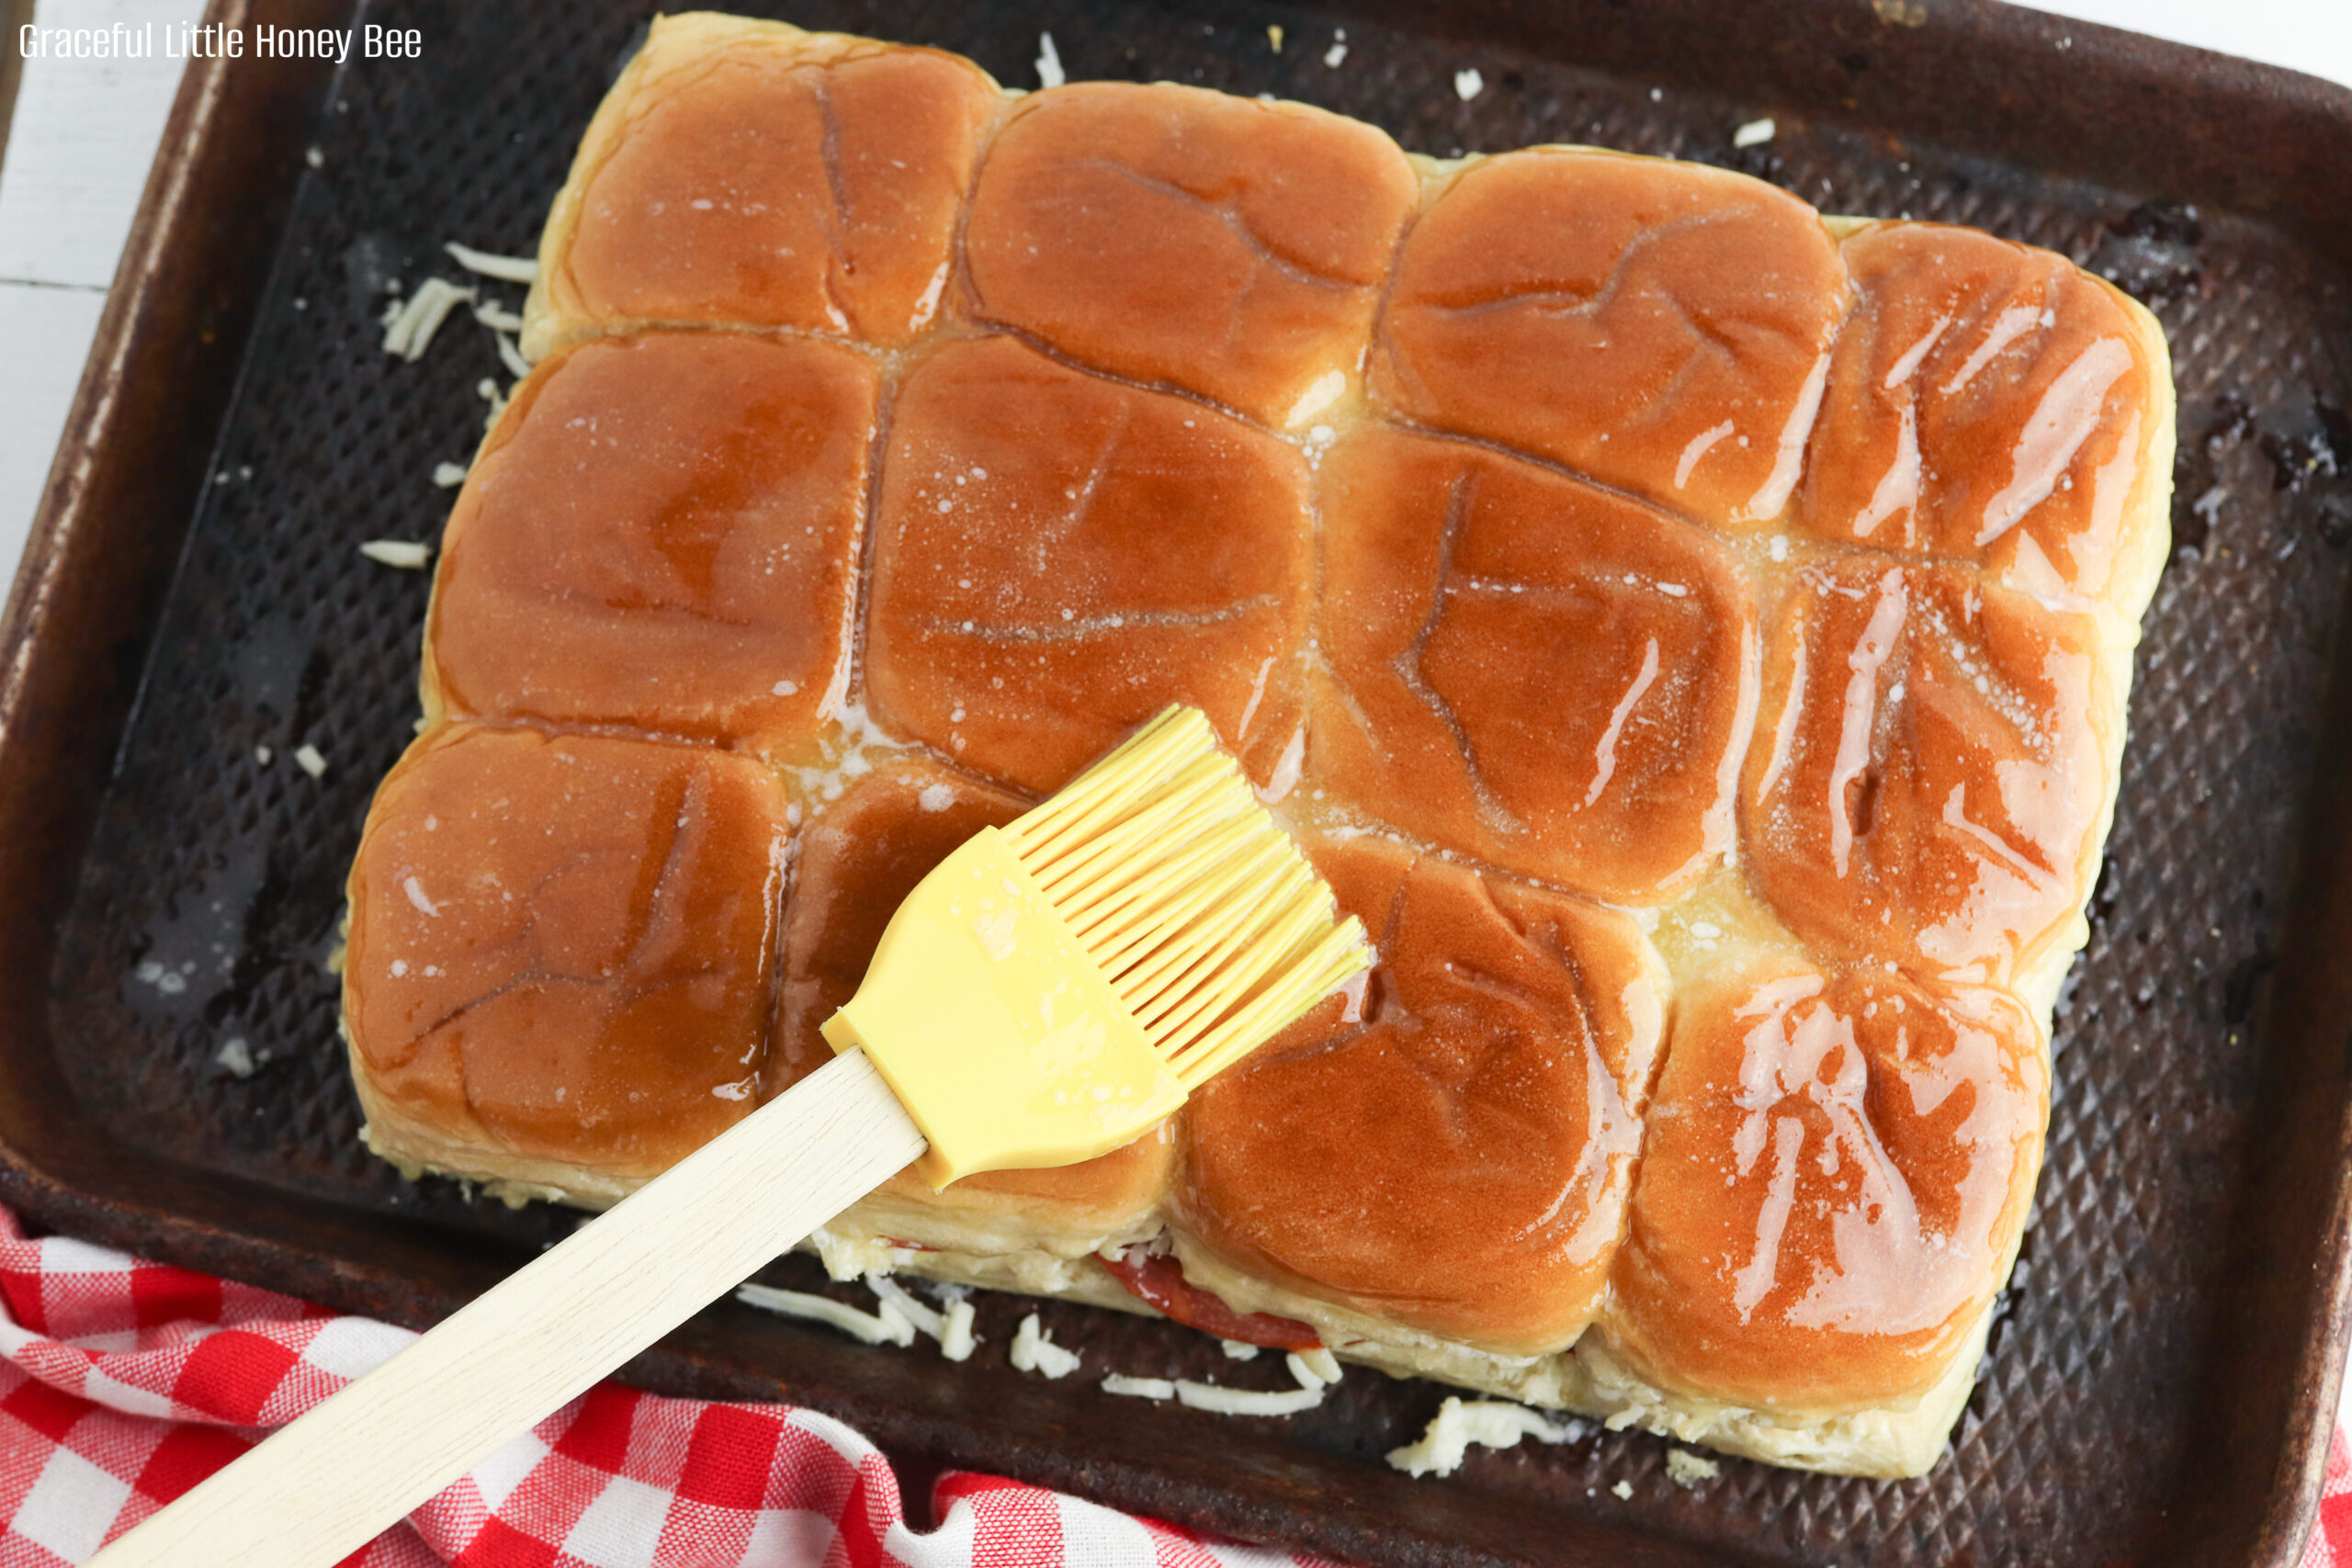 Sliders sitting on a baking sheet and slathered with butter.